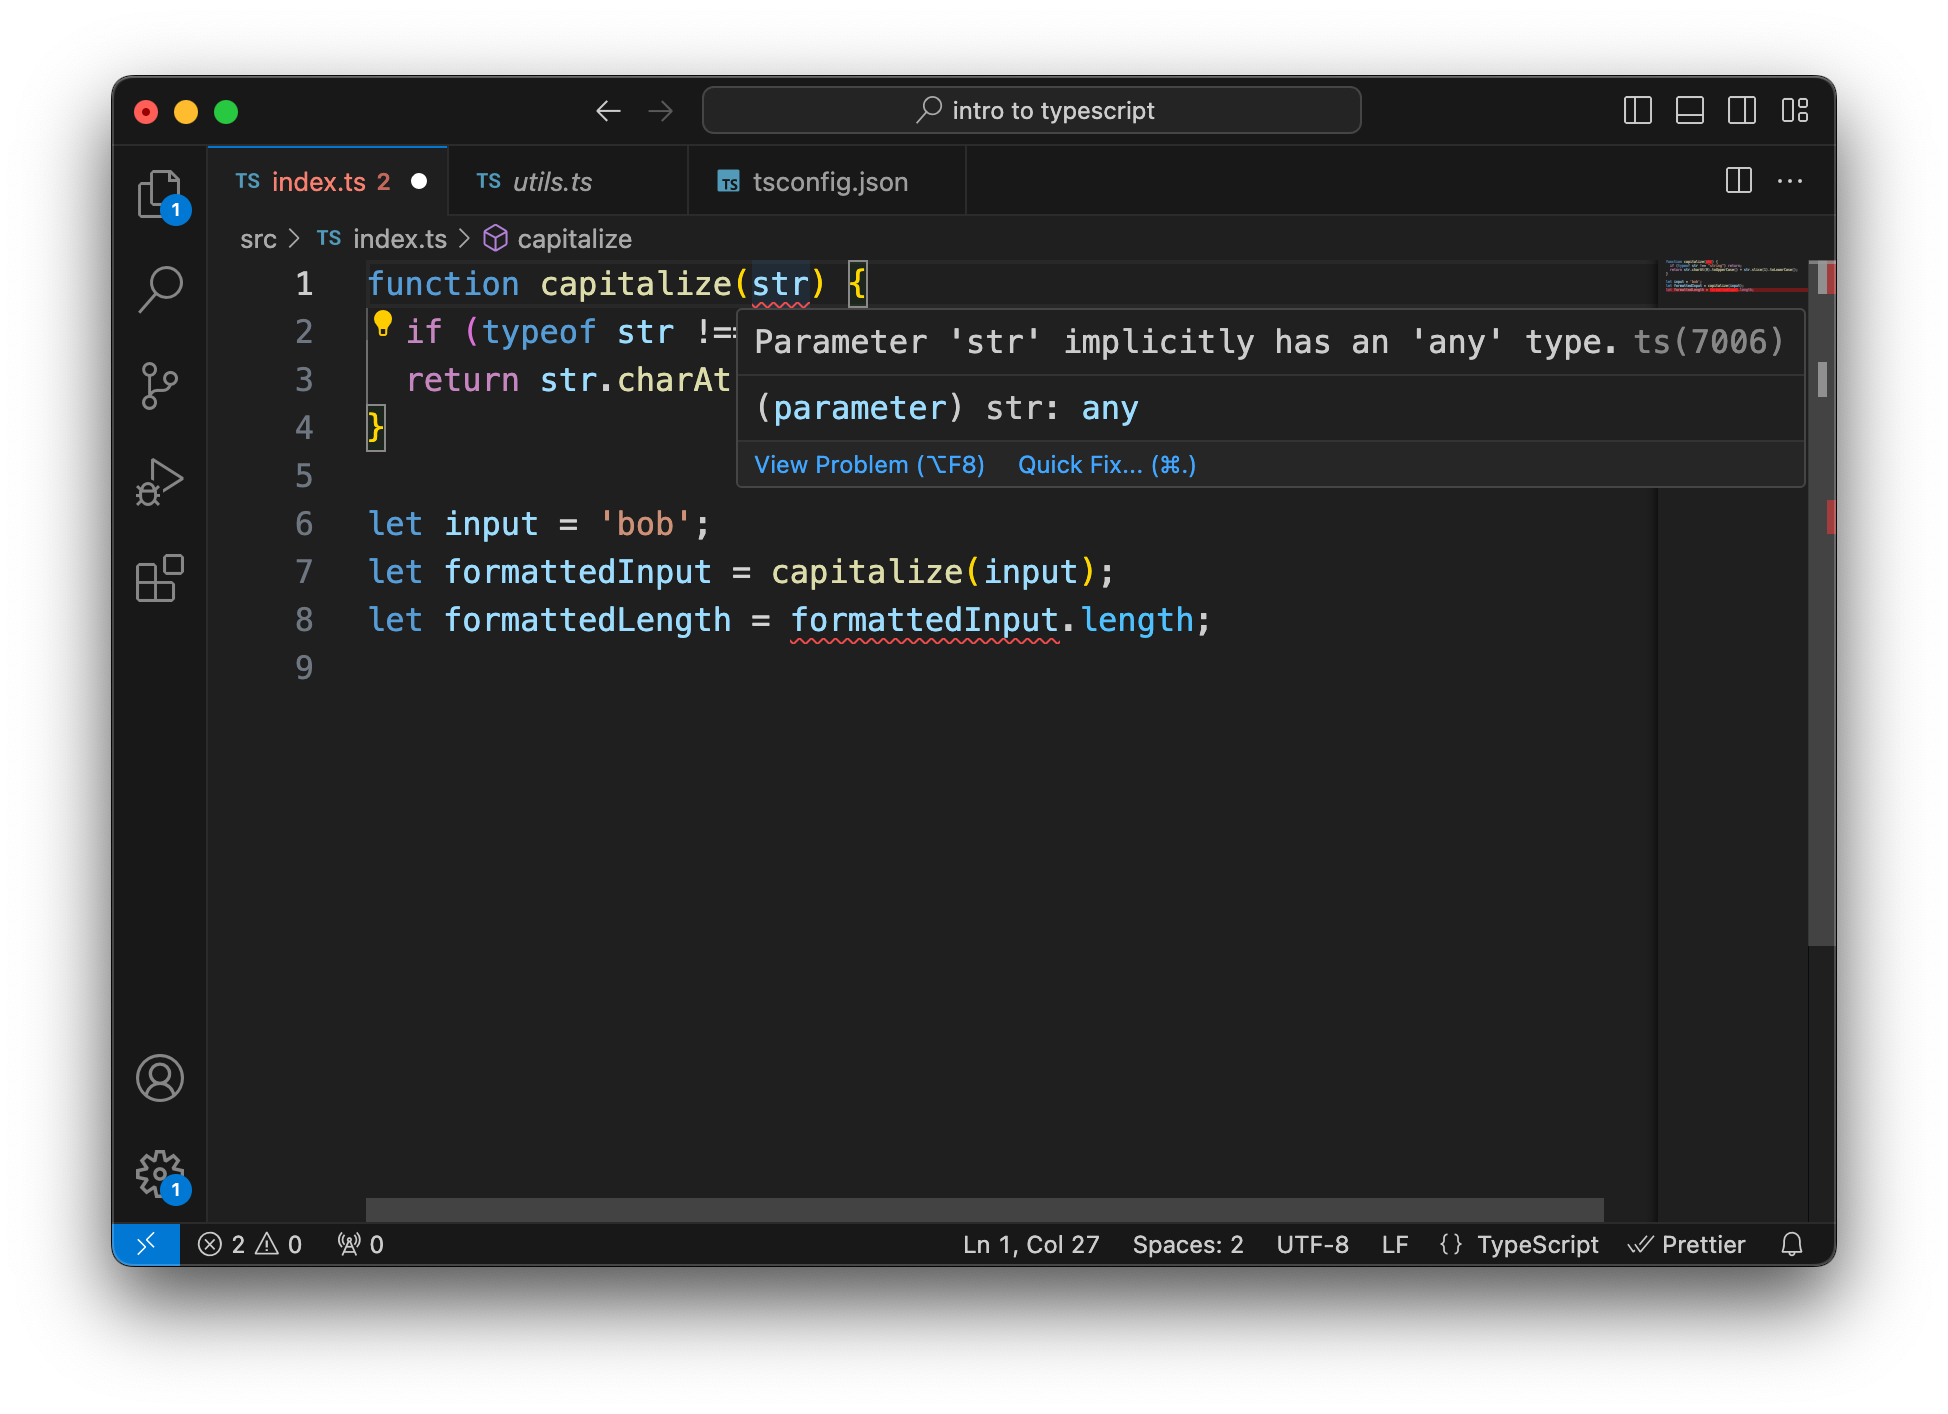 VS Code with the same TypeScript file as before. Now with strict mode, another error shows up that states that we need to set the type of our function argument.